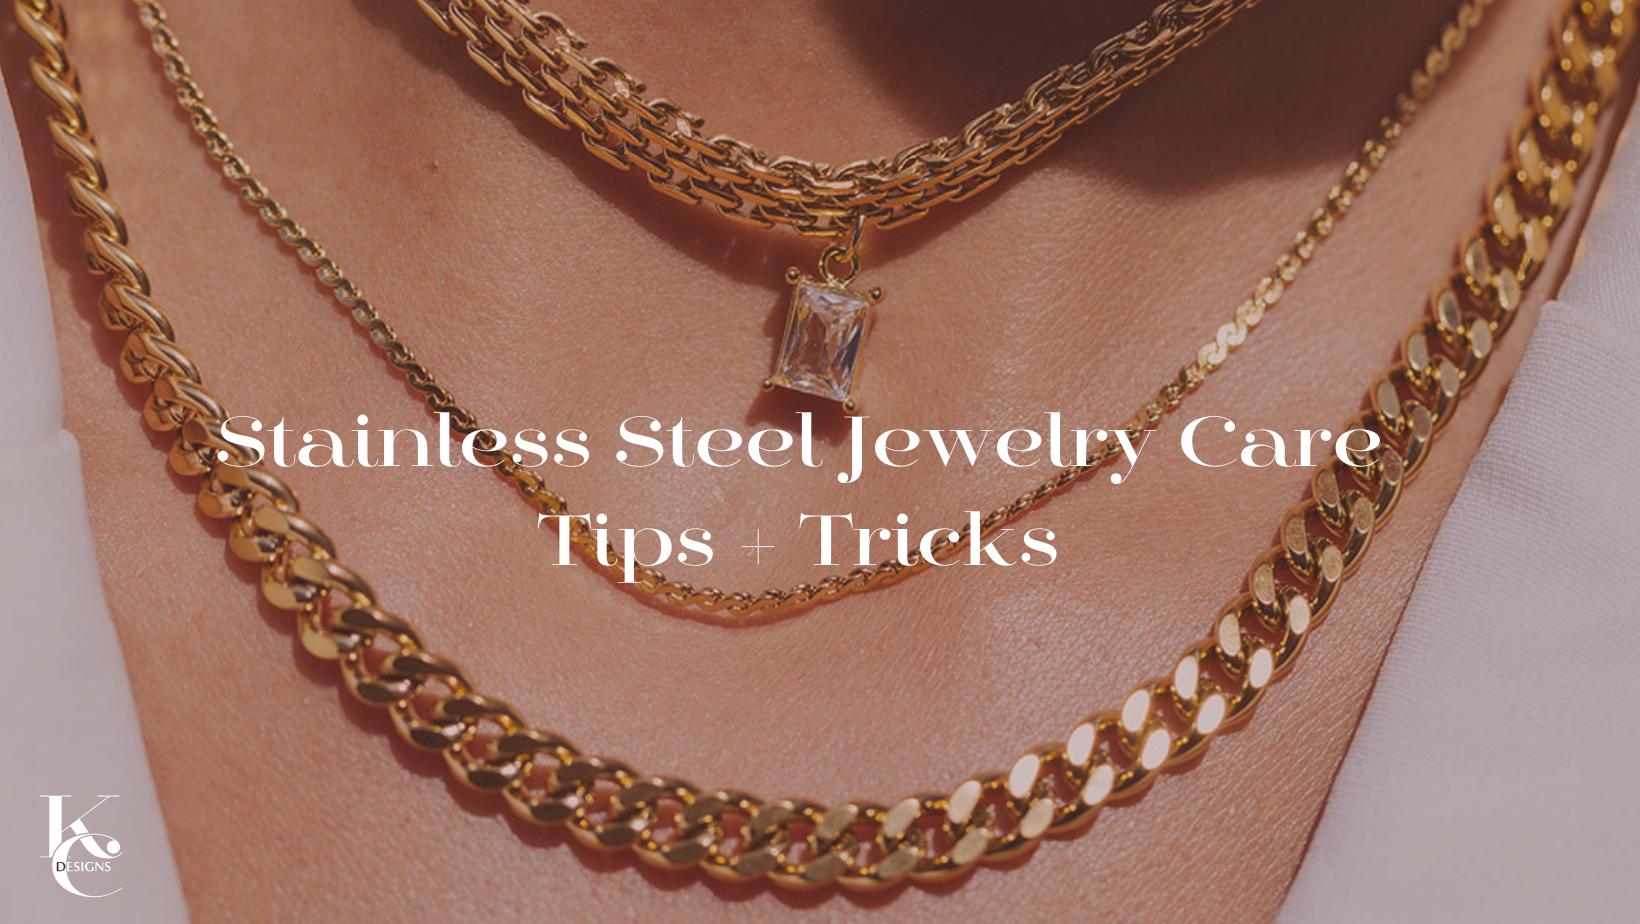 Sterling Silver Jewelry Care - Tips & Tricks